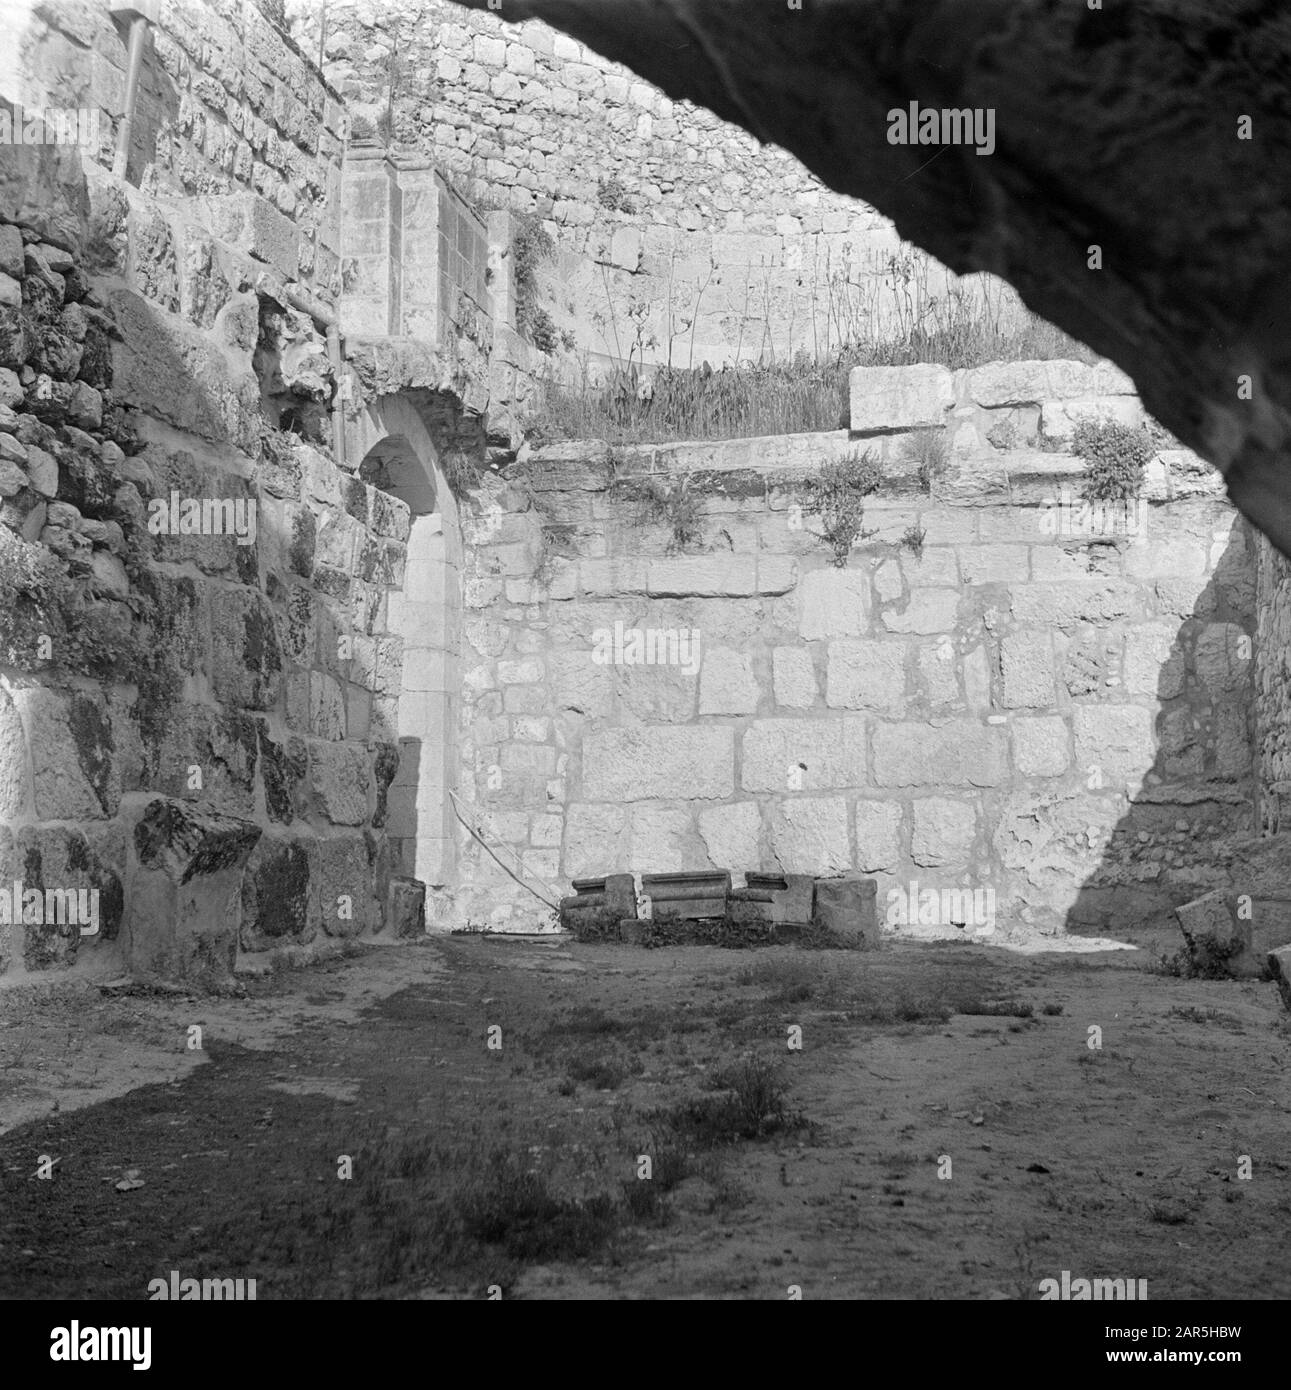 Israel 1948-1949  Jerusalem. Remains of the bath Bethesda in the old town north of the Temple Mount Date: 1948 Location: Bethesda, Israel, Jerusalem Keywords: archeology, bathhouses, walls, ruins Stock Photo